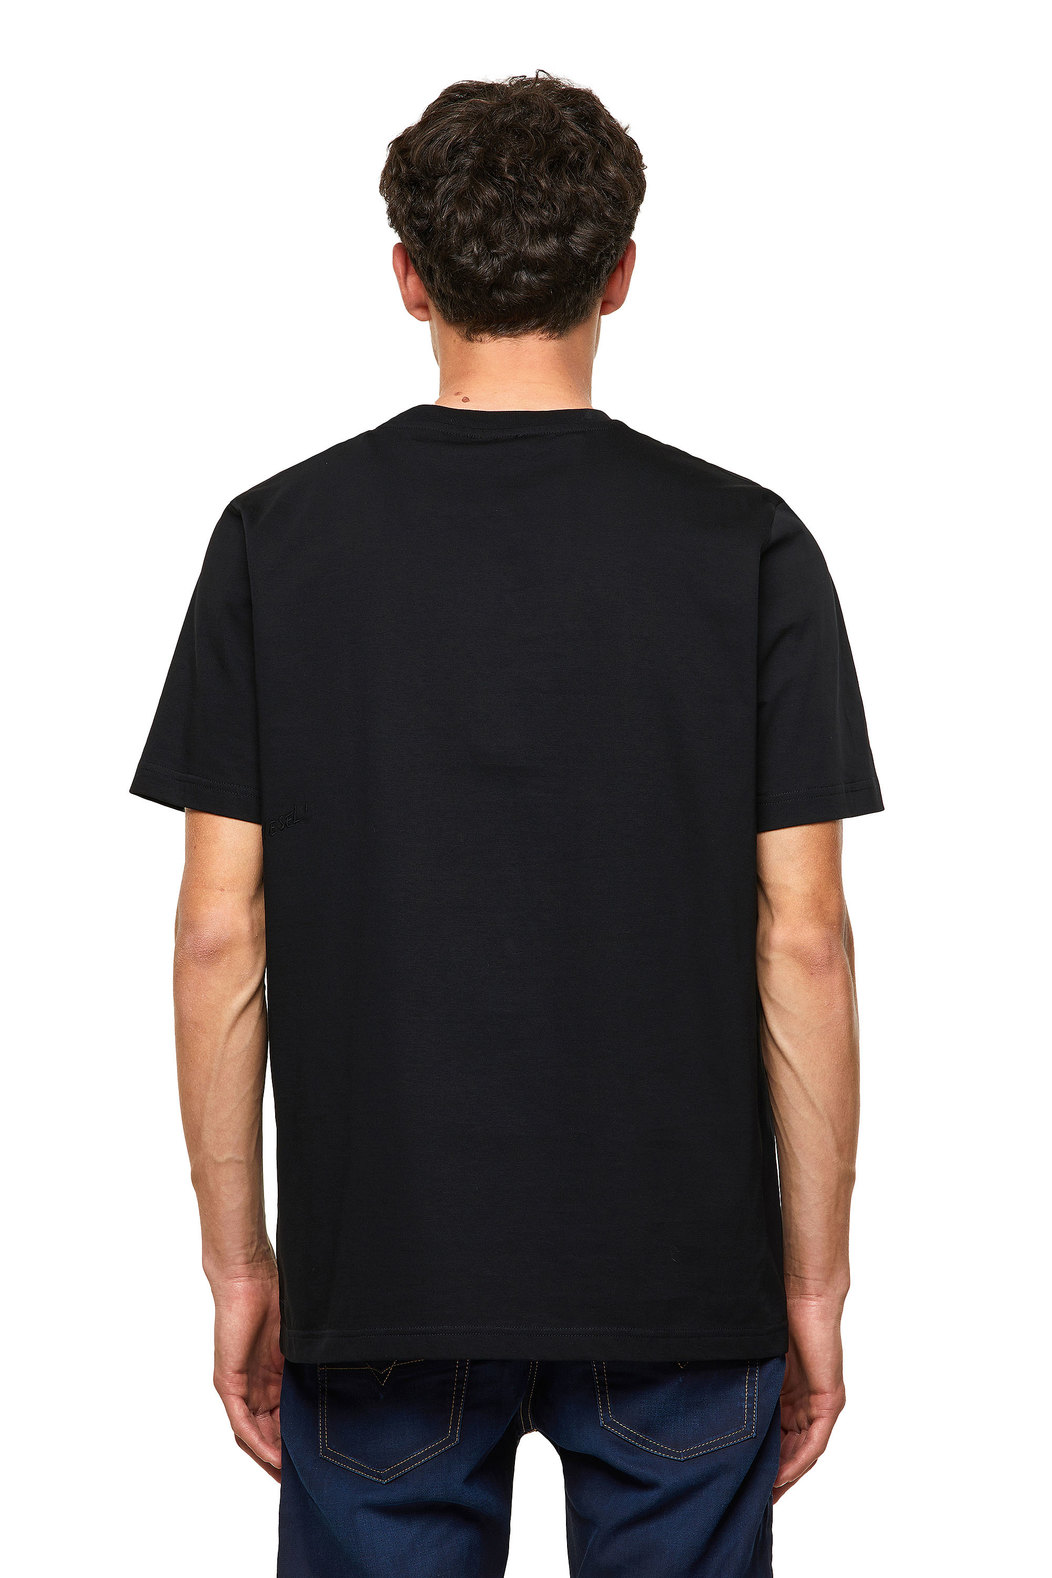 Green Label T-shirt with two-tone panels